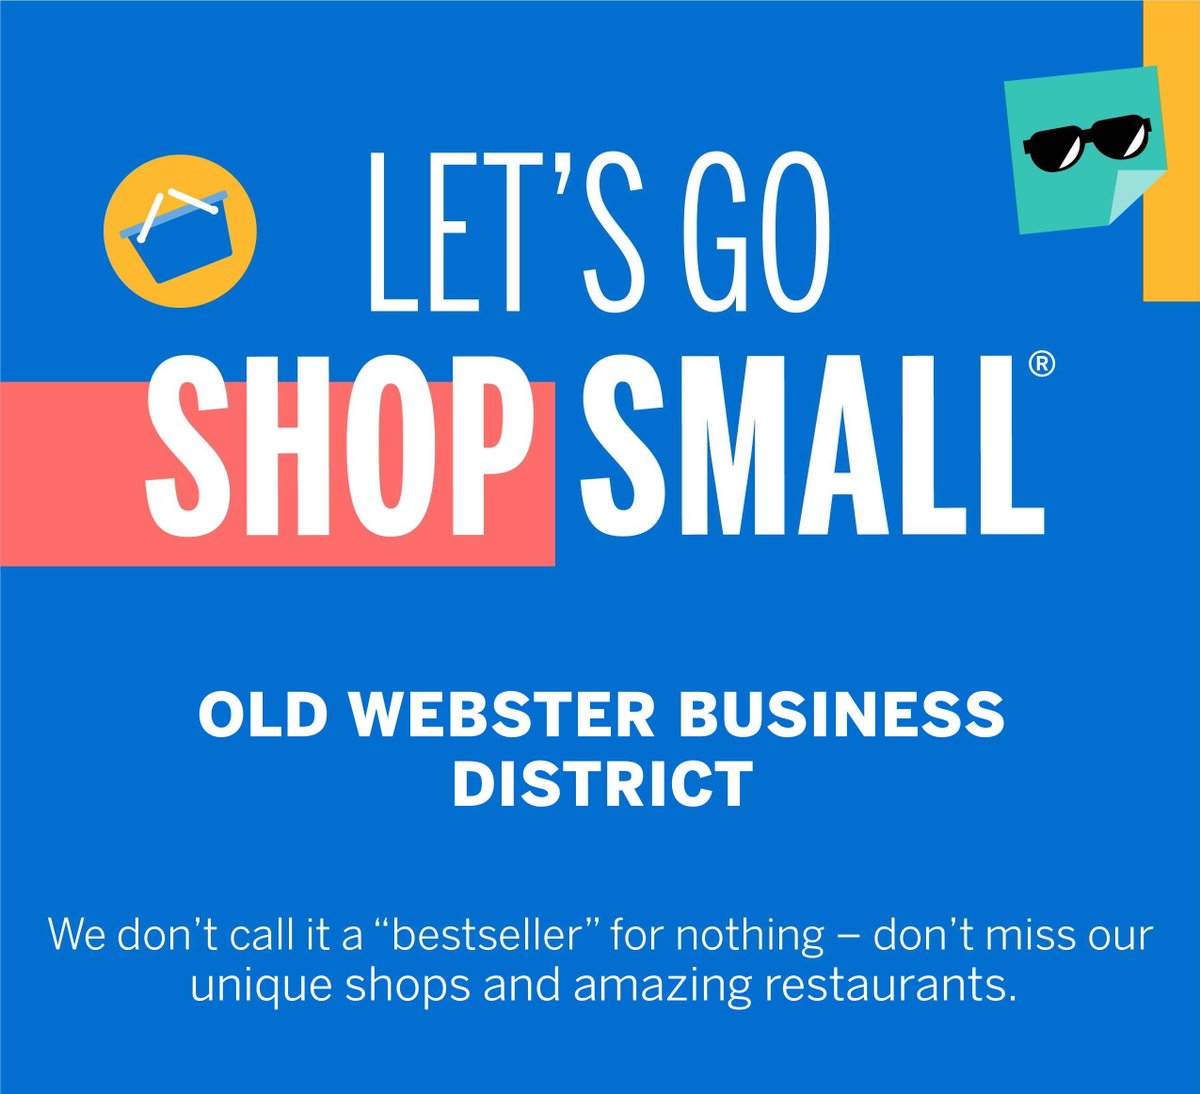 Lots of great deals at our Old Webster Locally-Owned businesses on #SmallBizSat
#ShopSmall